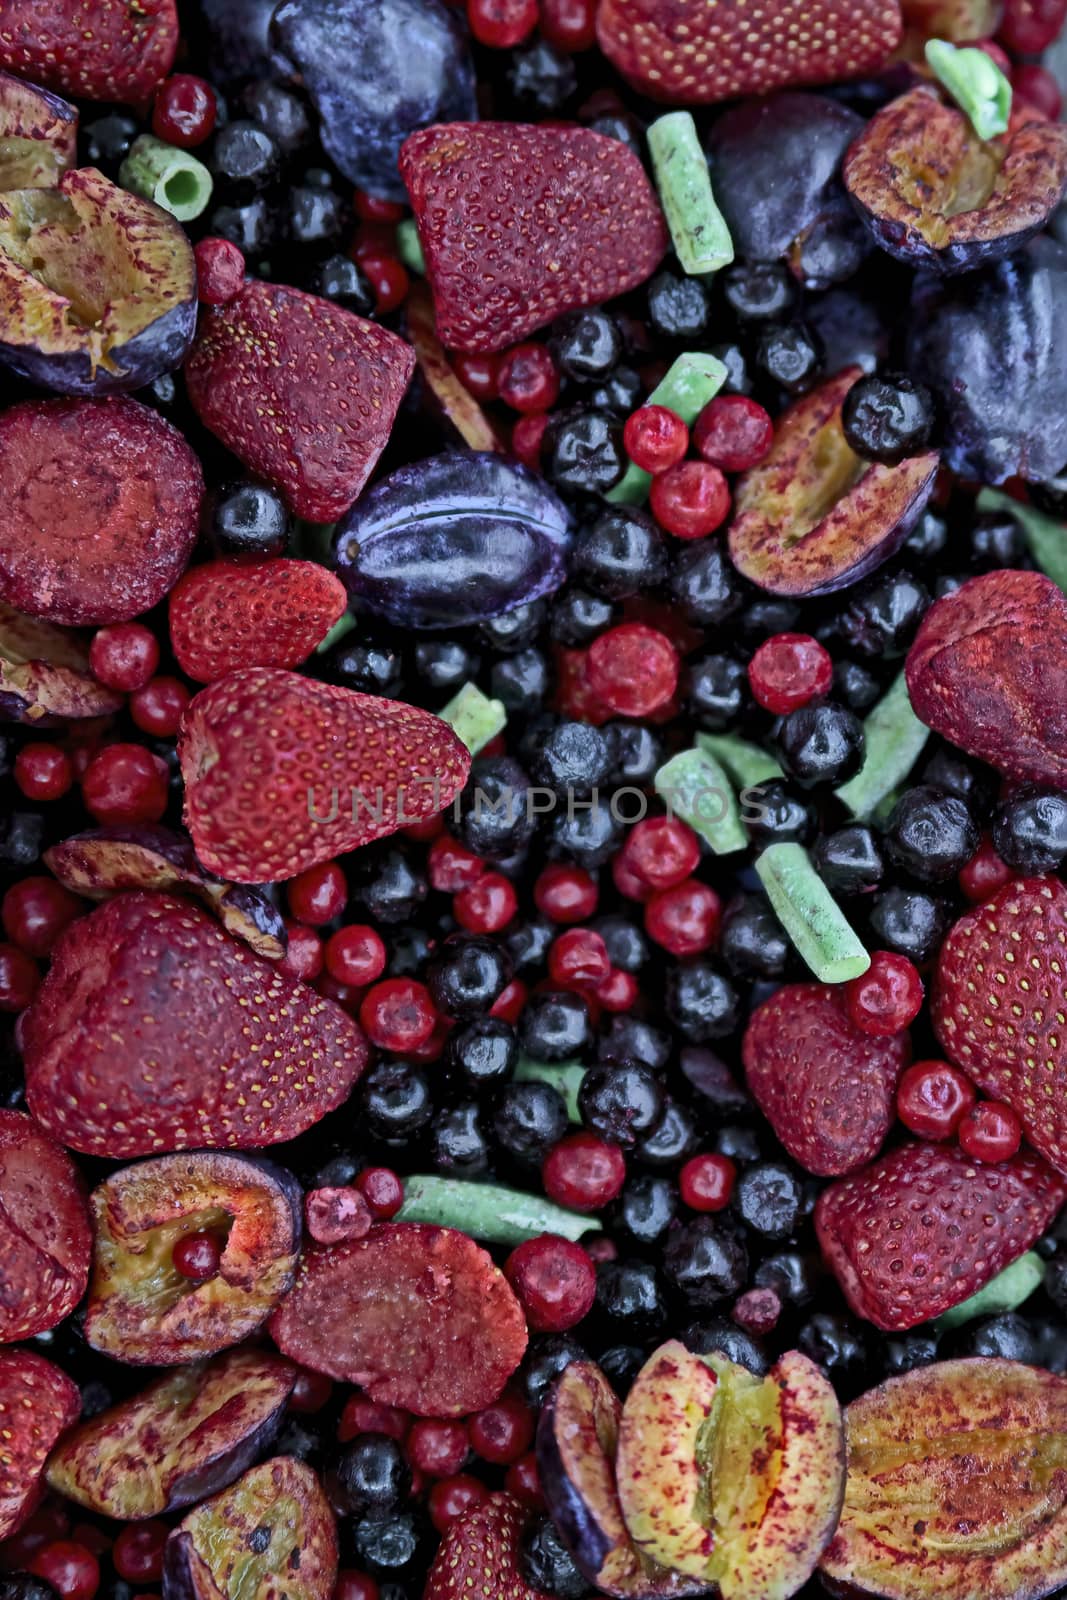 Frozen berries in grocery store shot close-up, blurred background. Multicolored mix of strawberries, plums, currants.